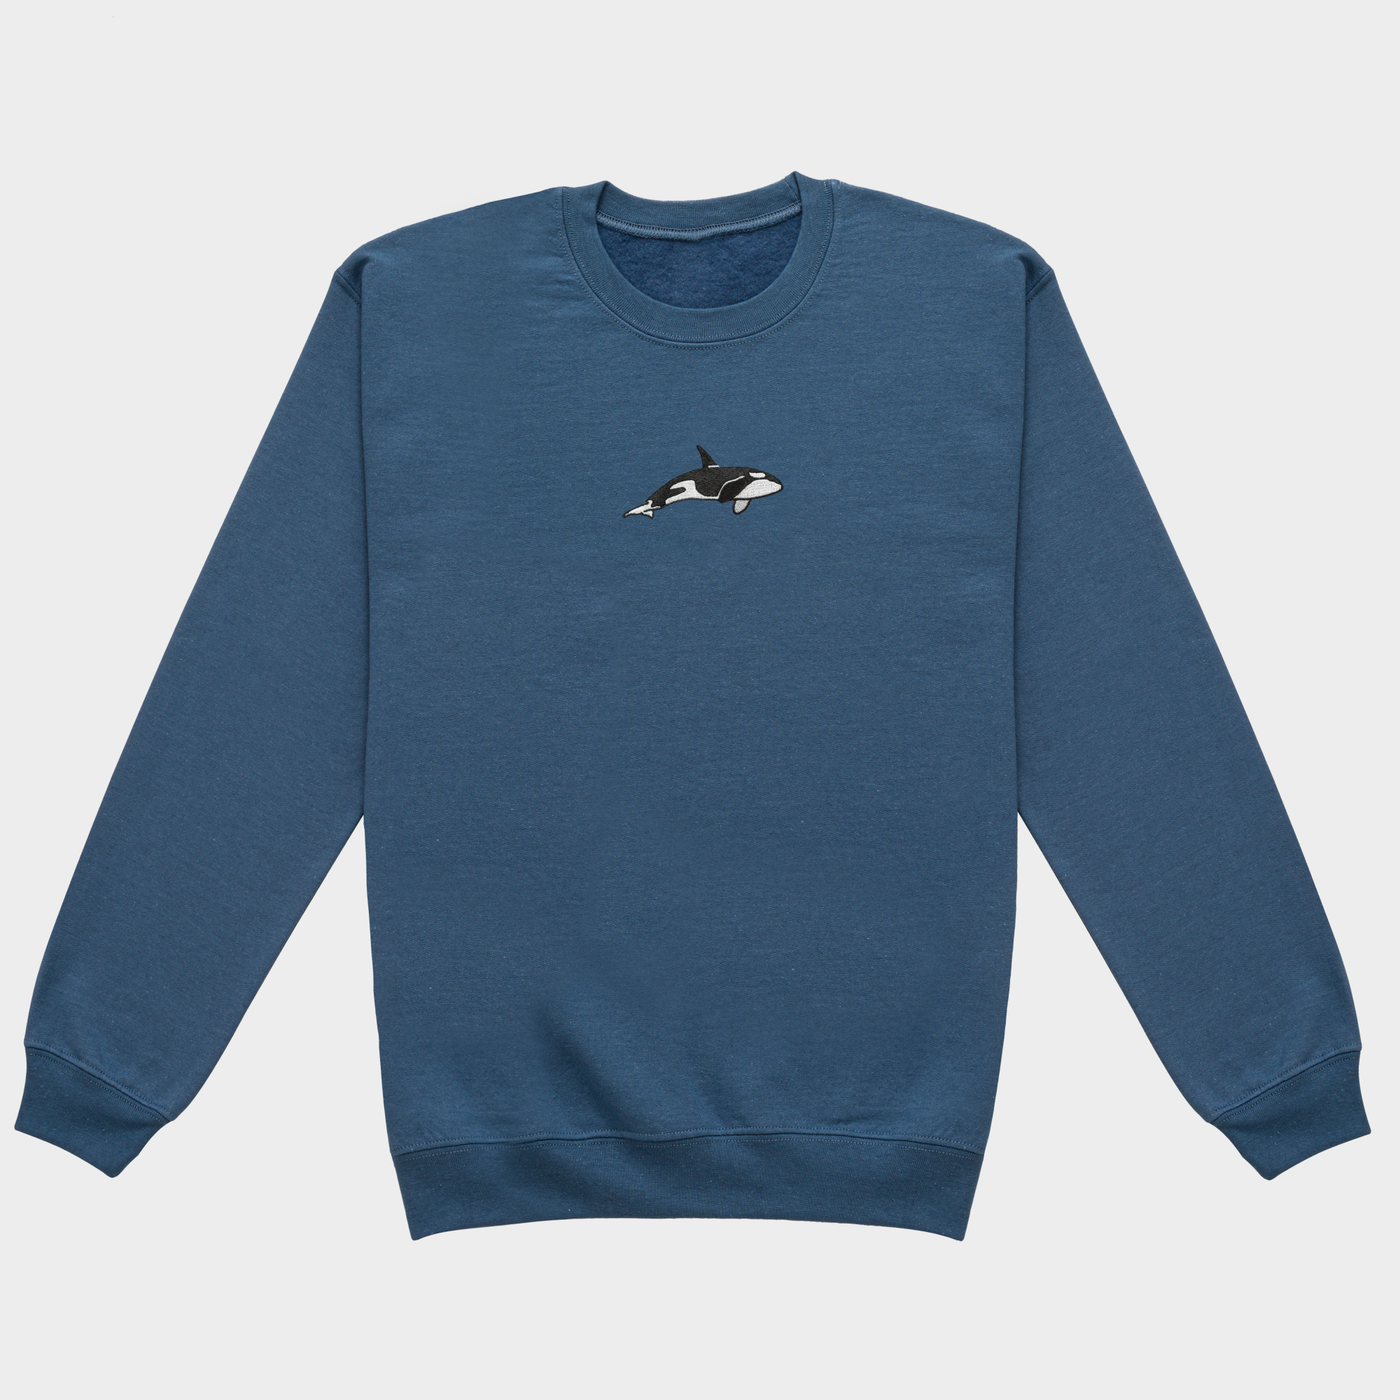 Bobby's Planet Men's Embroidered Orca Sweatshirt from Seven Seas Fish Animals Collection in Indigo Blue Color#color_indigo-blue